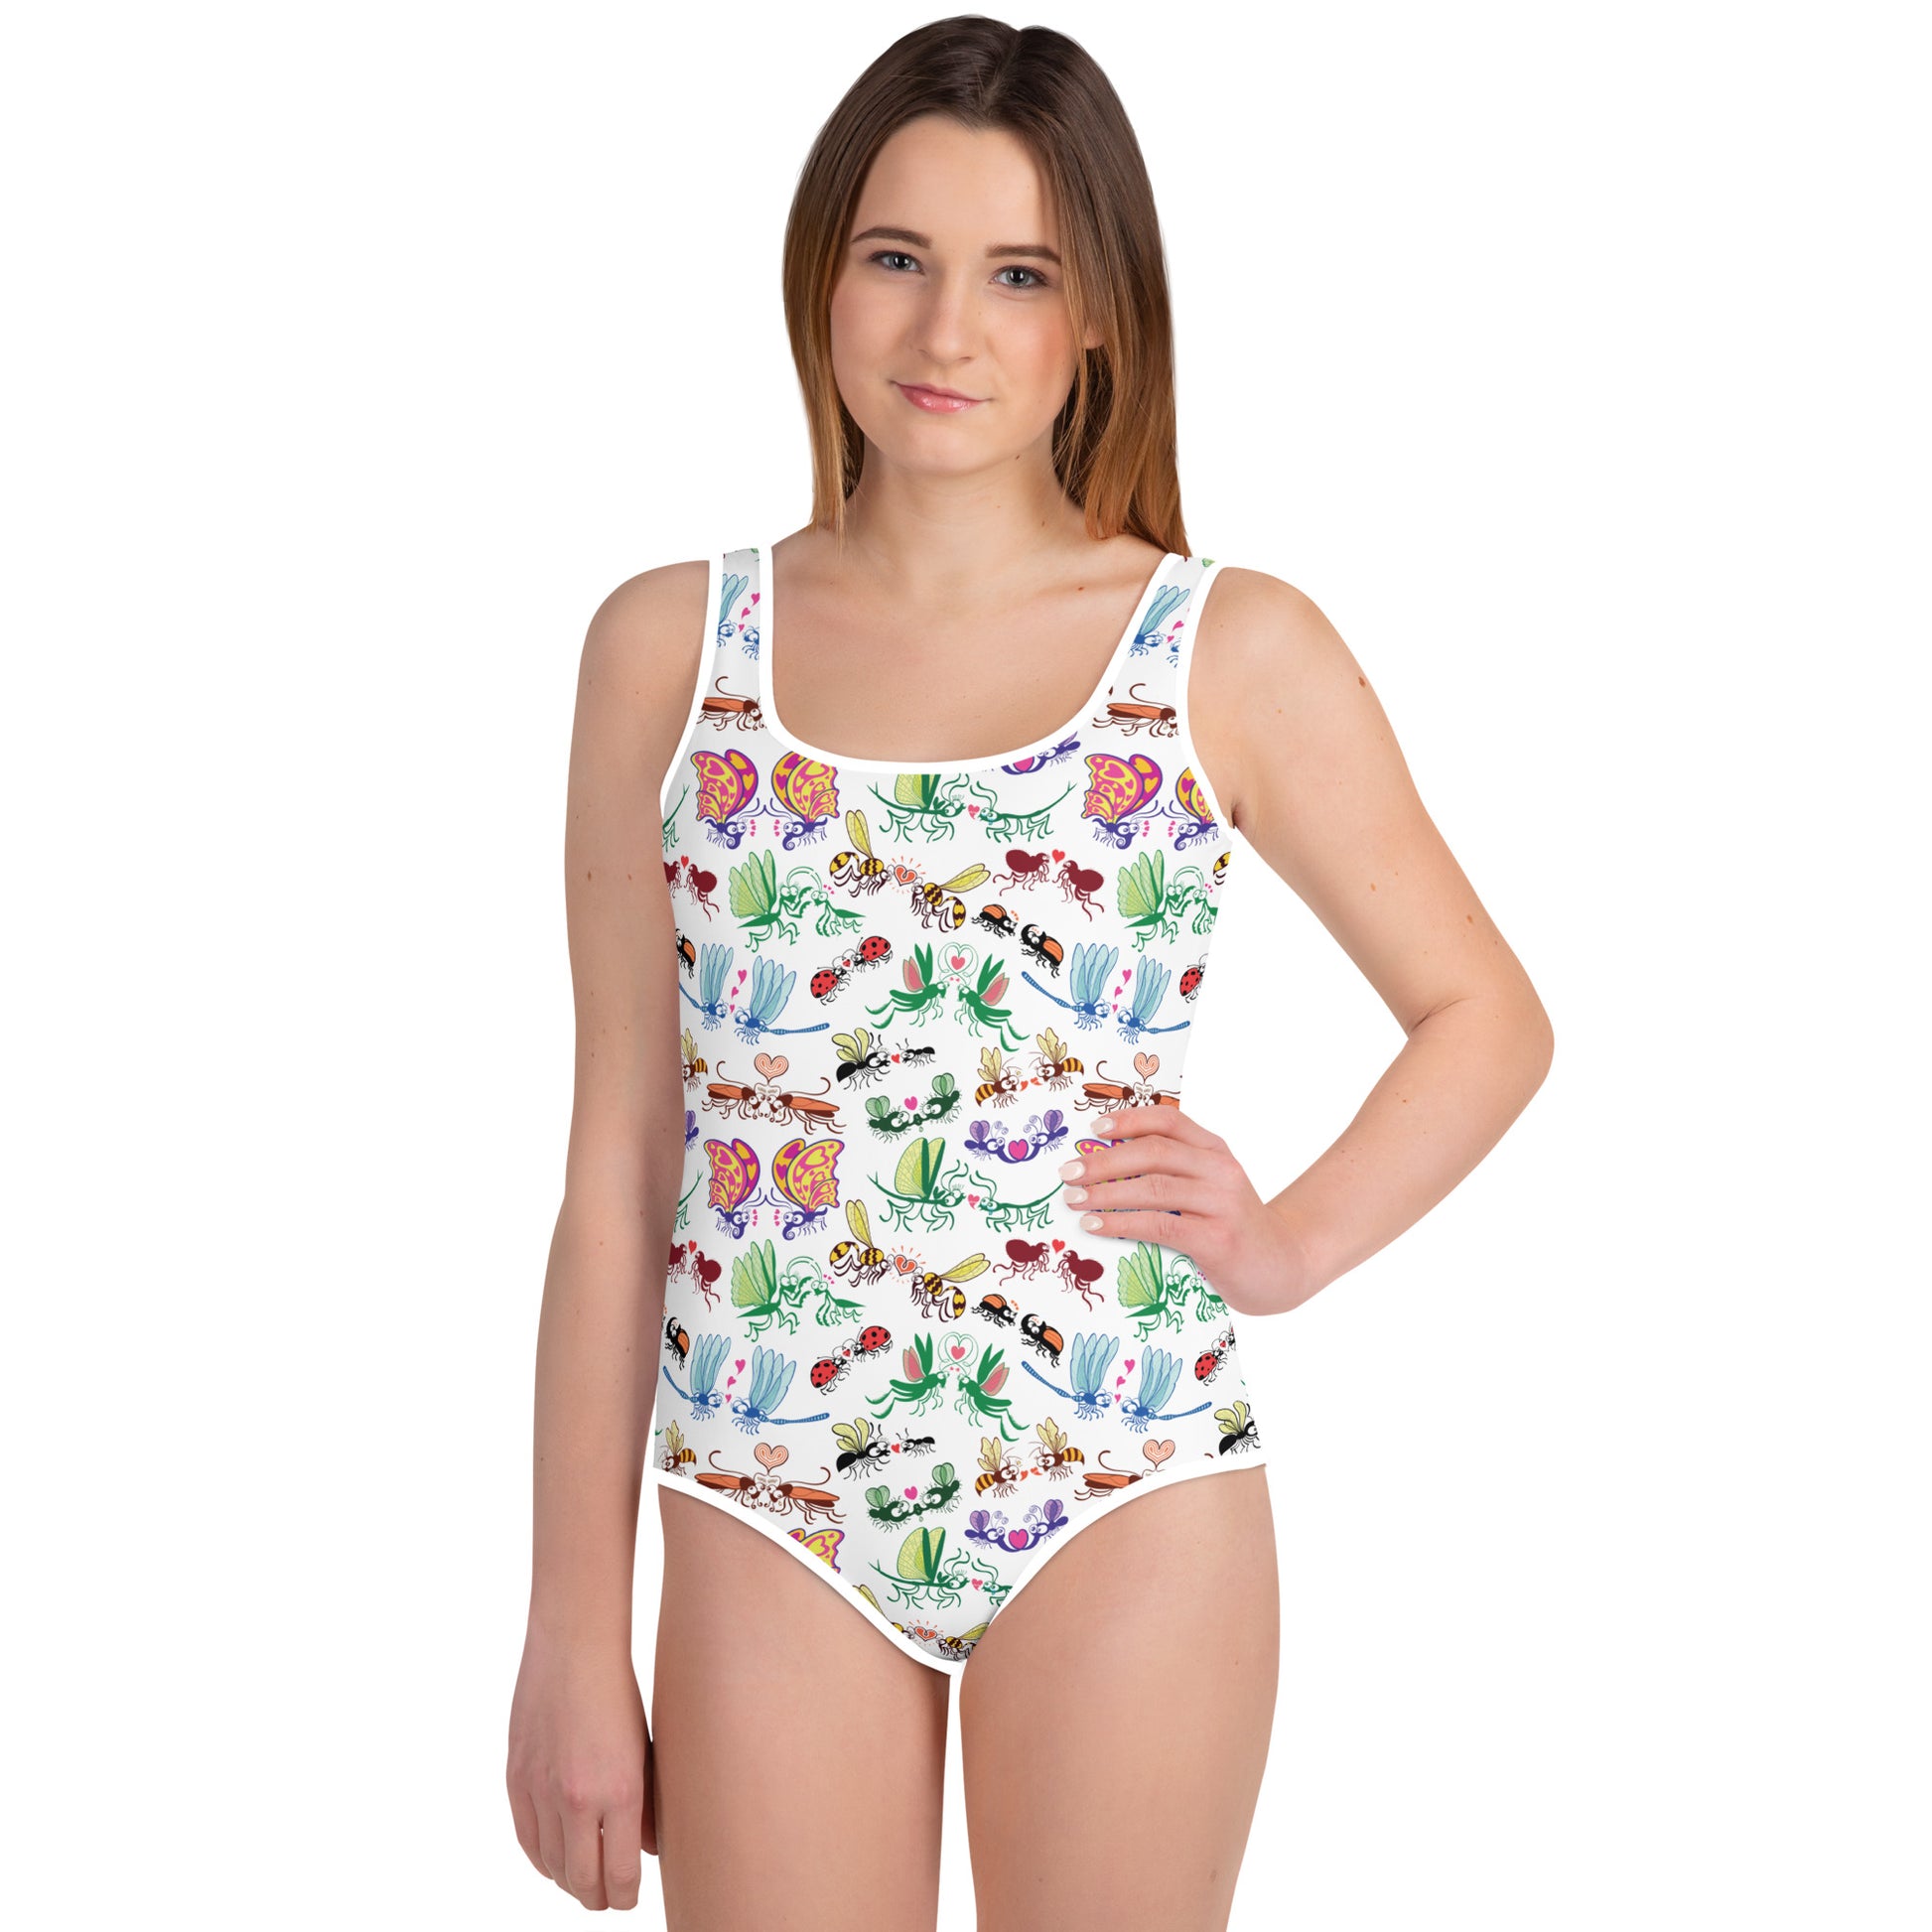 Cool insects madly in love All-Over Print Youth Swimsuit. Front view